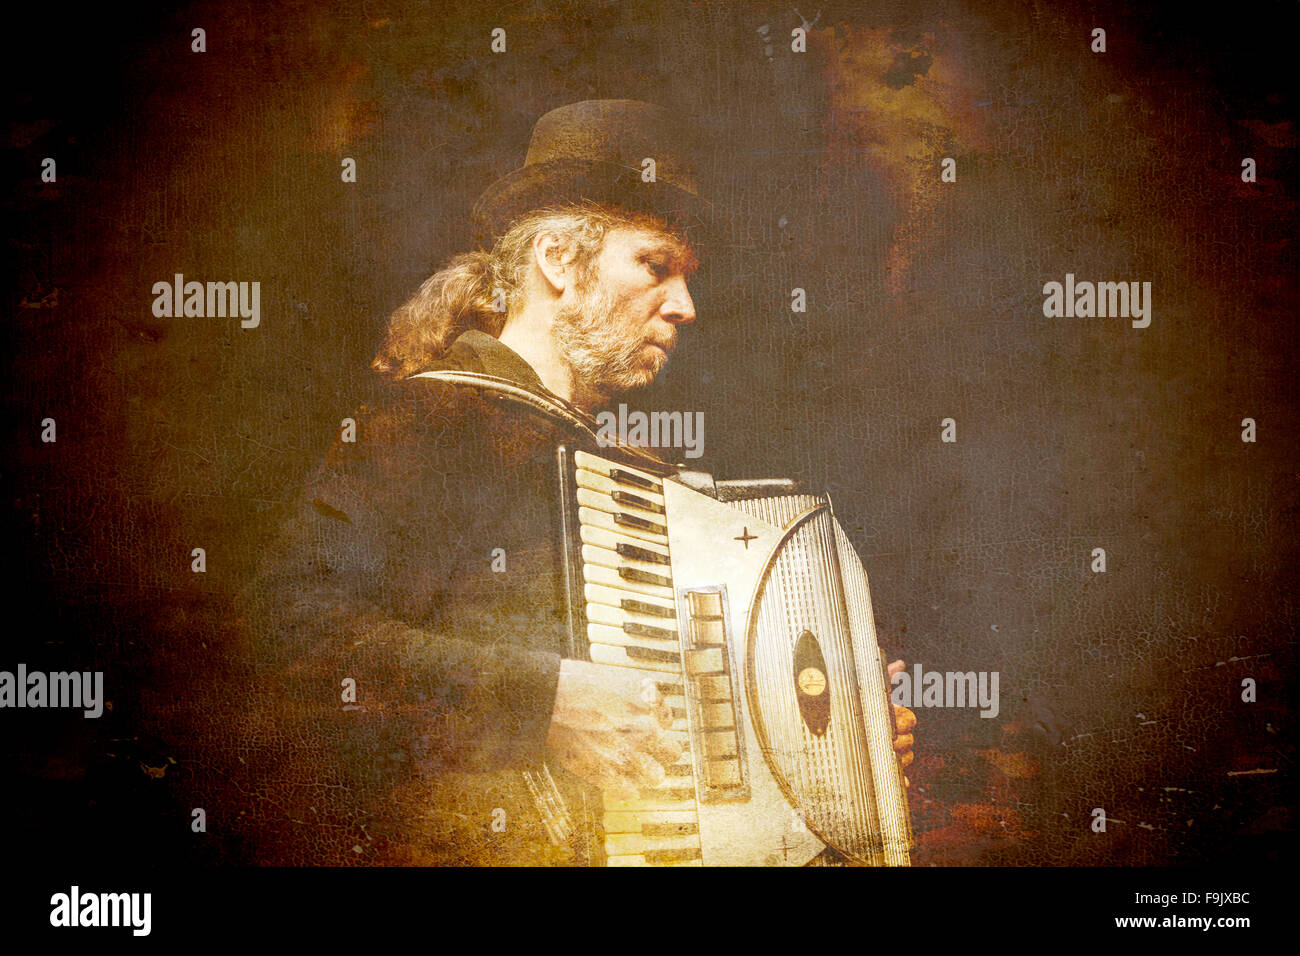 Gypsy accordion player processed with textures for a vintage grunge look. Stock Photo